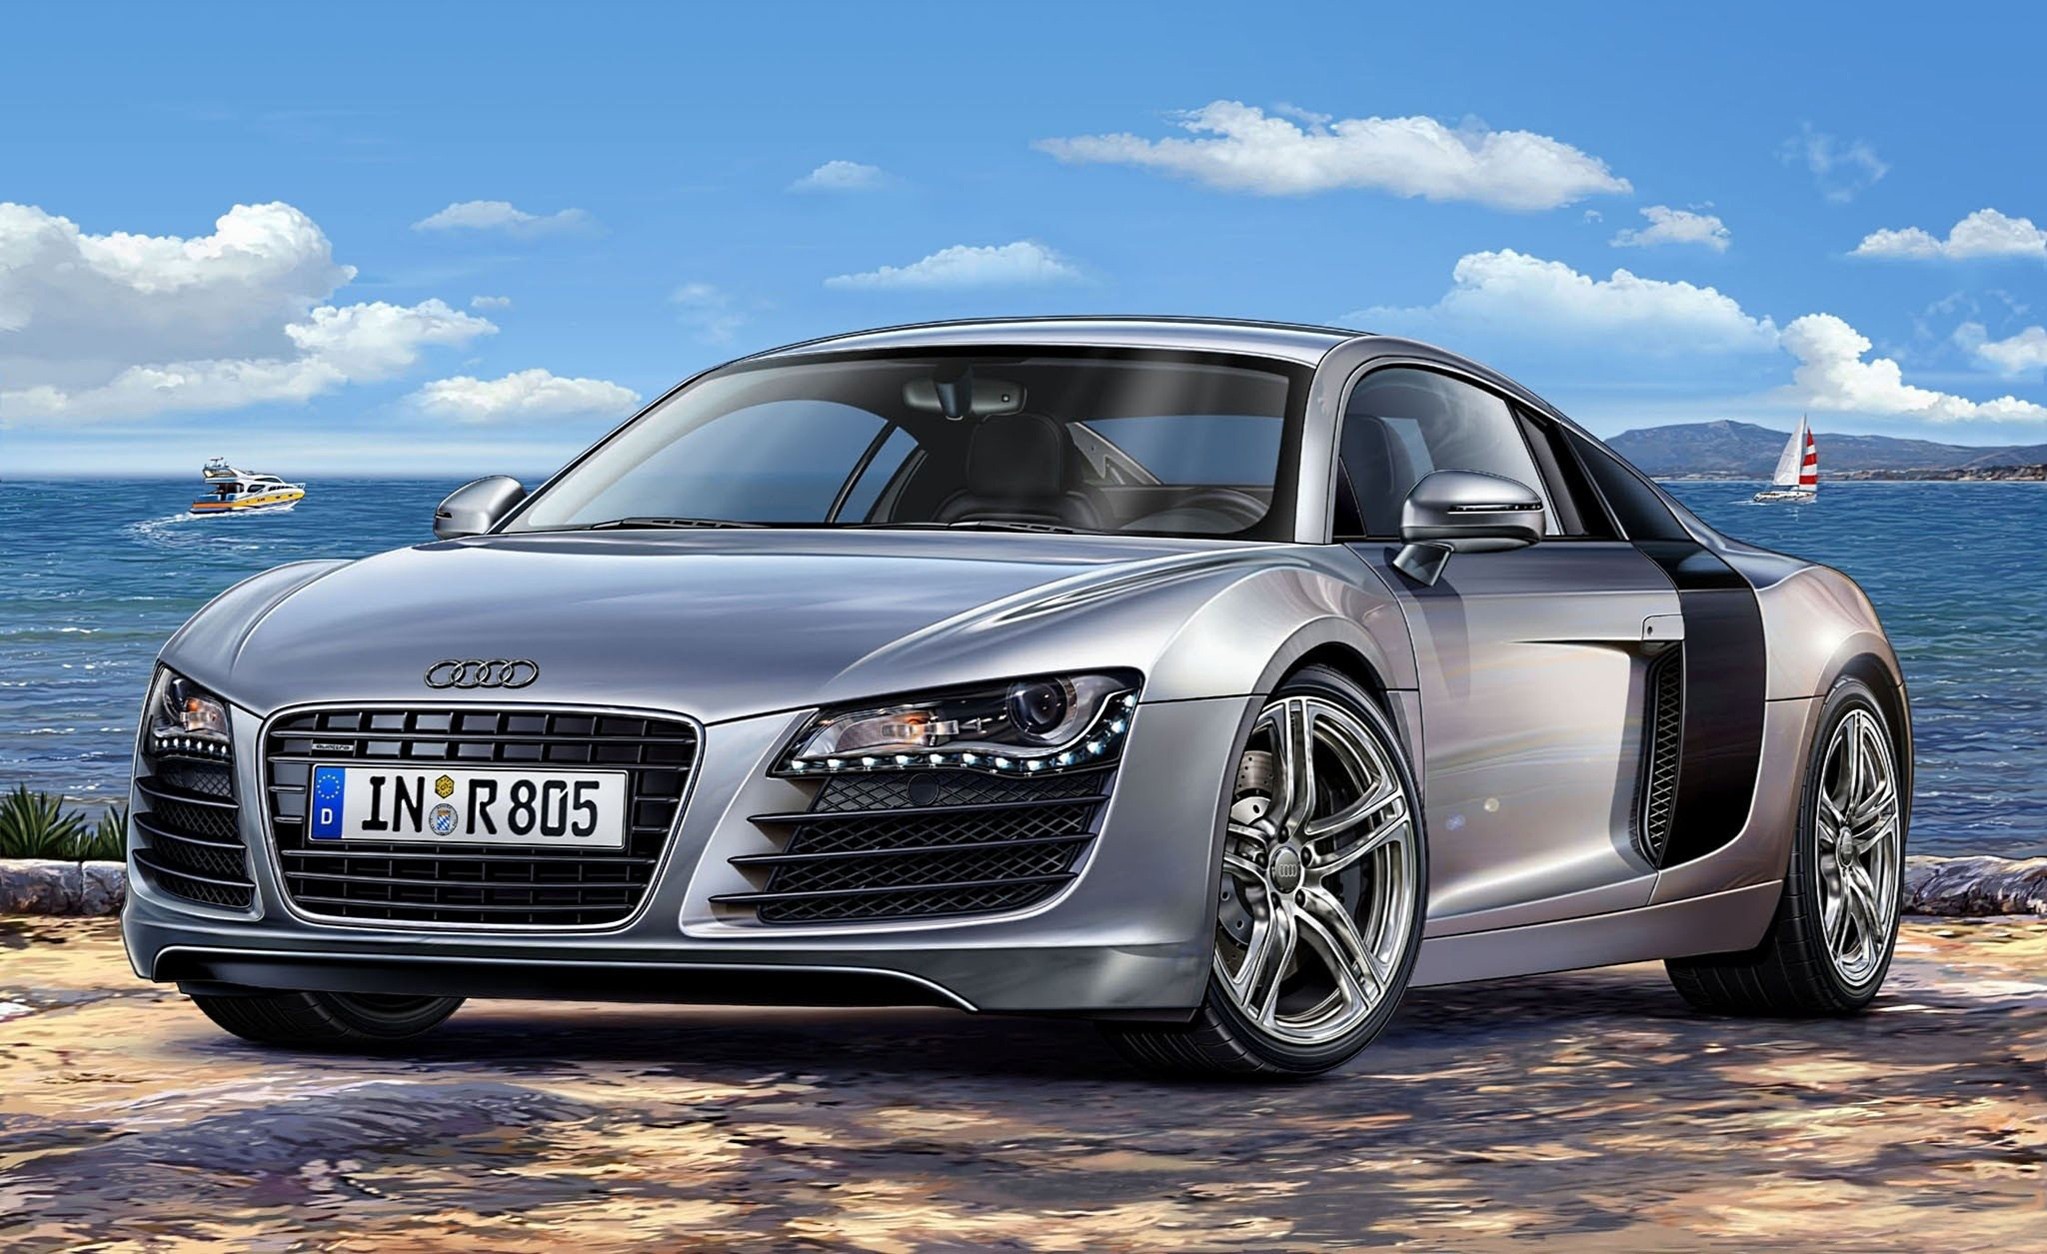 General 2047x1254 car vehicle numbers artwork Audi silver cars Audi R8 German cars Volkswagen Group water frontal view clouds sky licence plates headlights